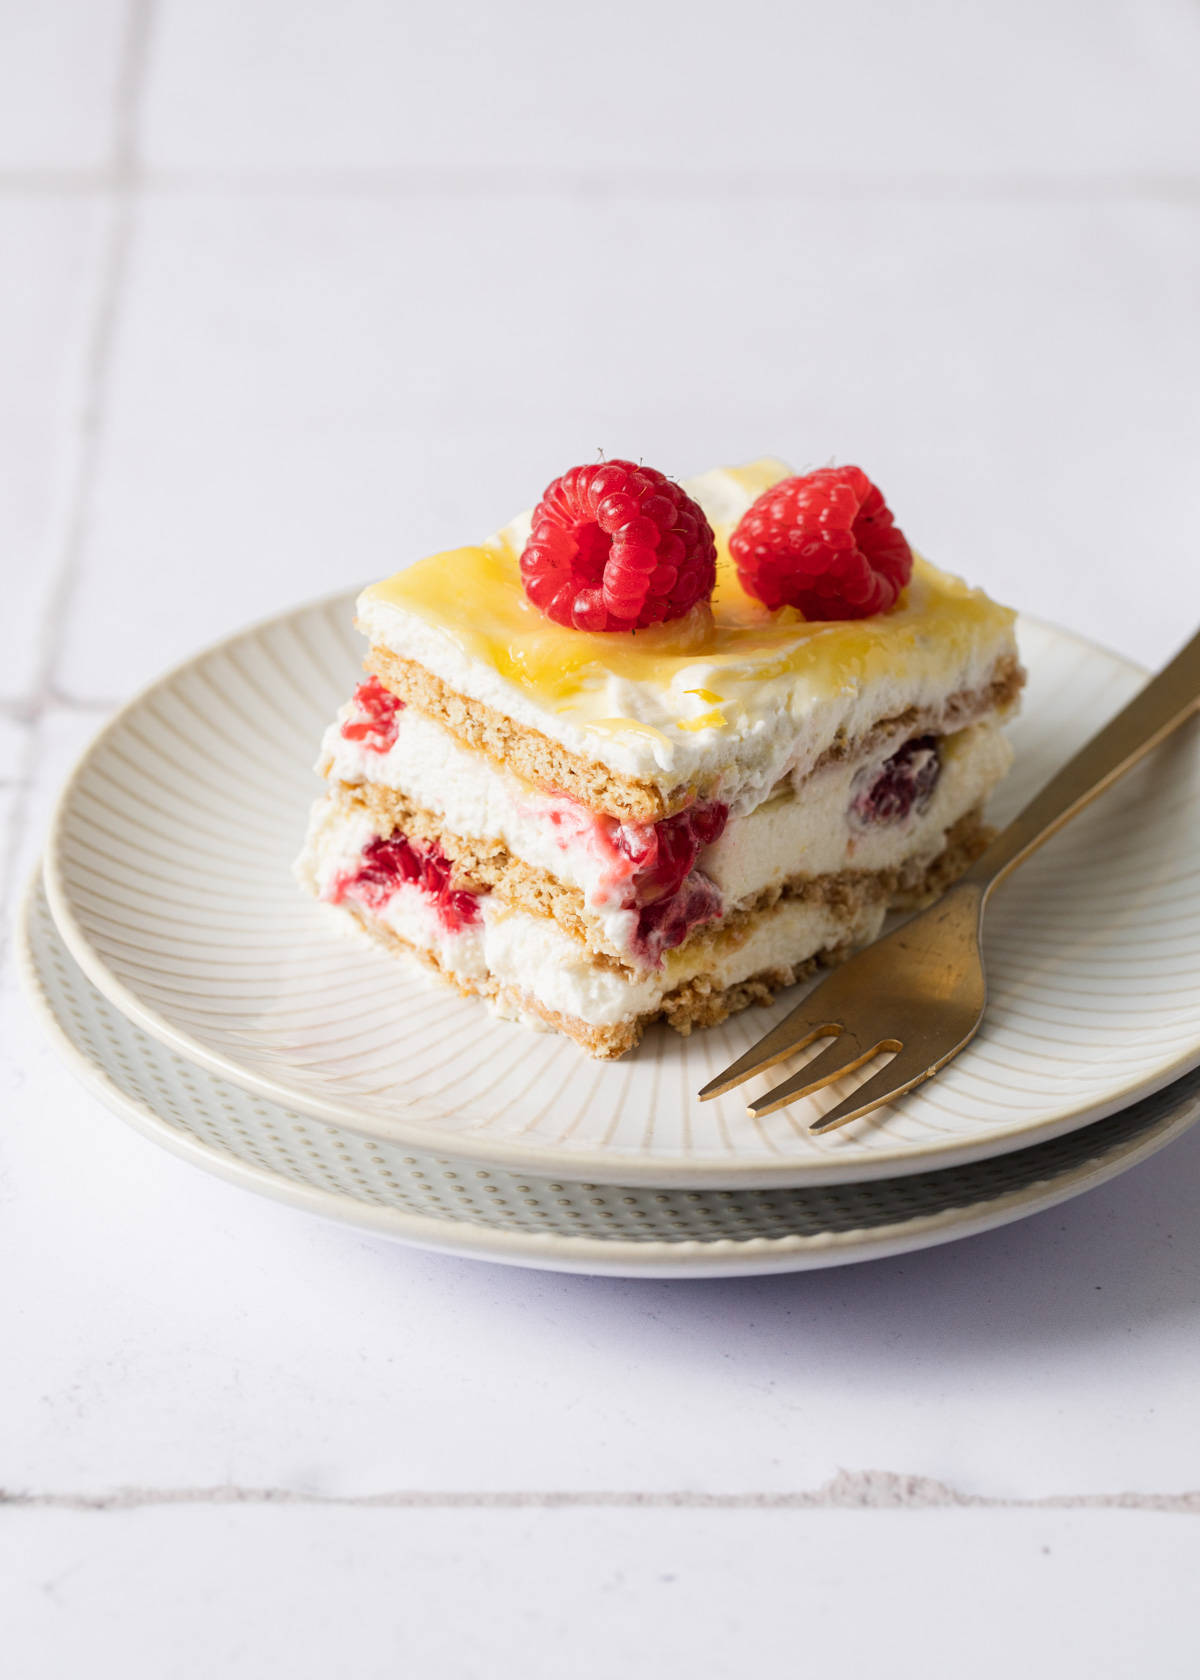 A slice of icebox cake with fresh raspberries and lemon curd on top